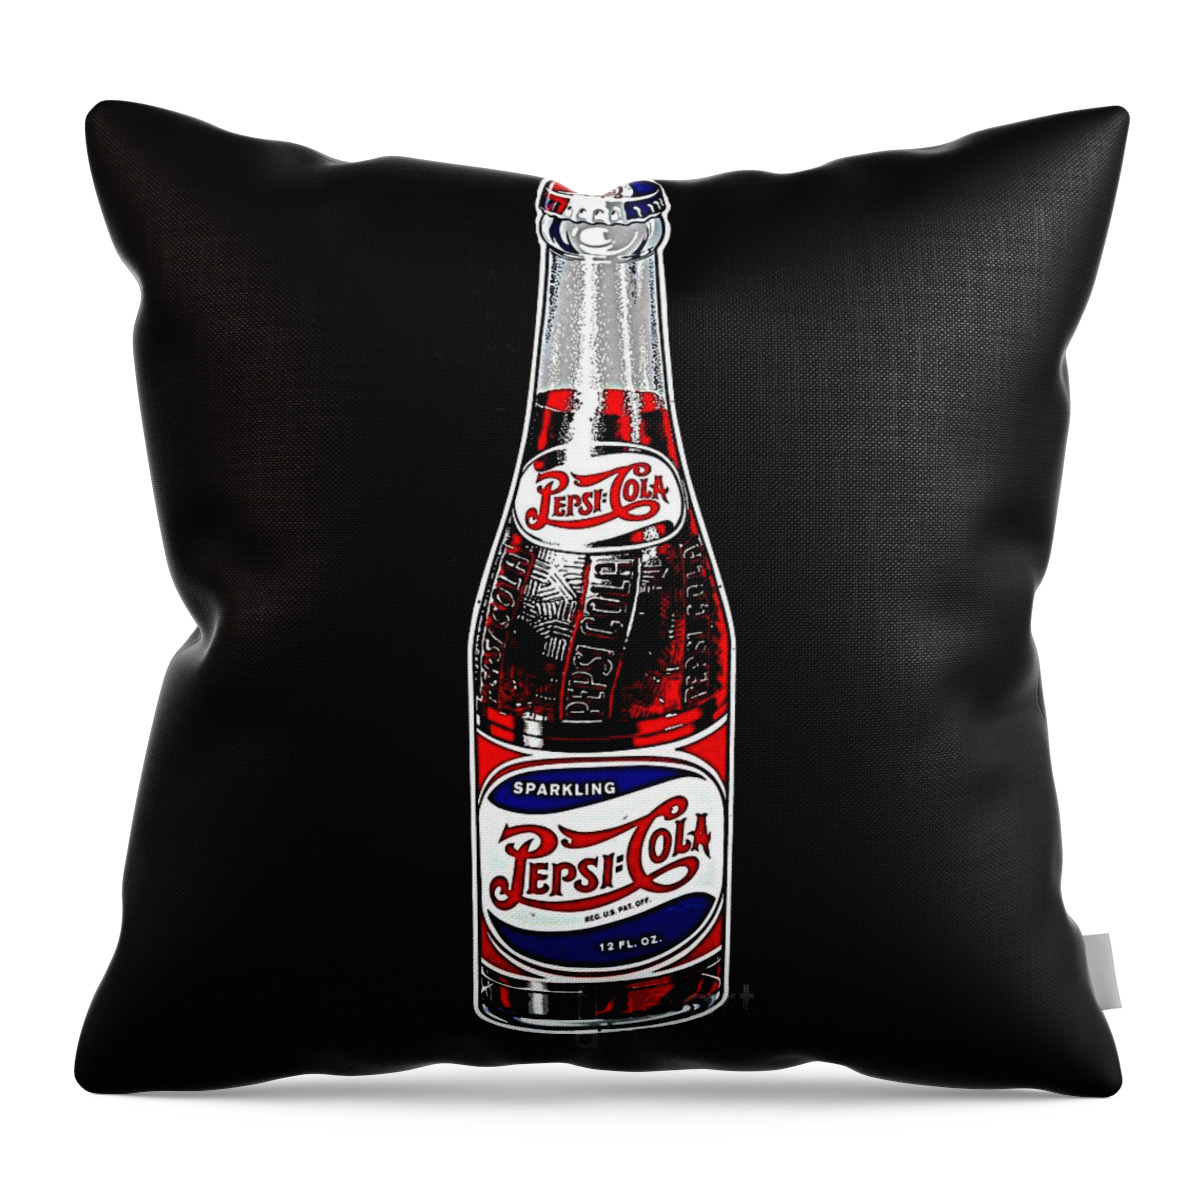  Throw Pillow featuring the photograph Pepsi Sign by Kelly Awad